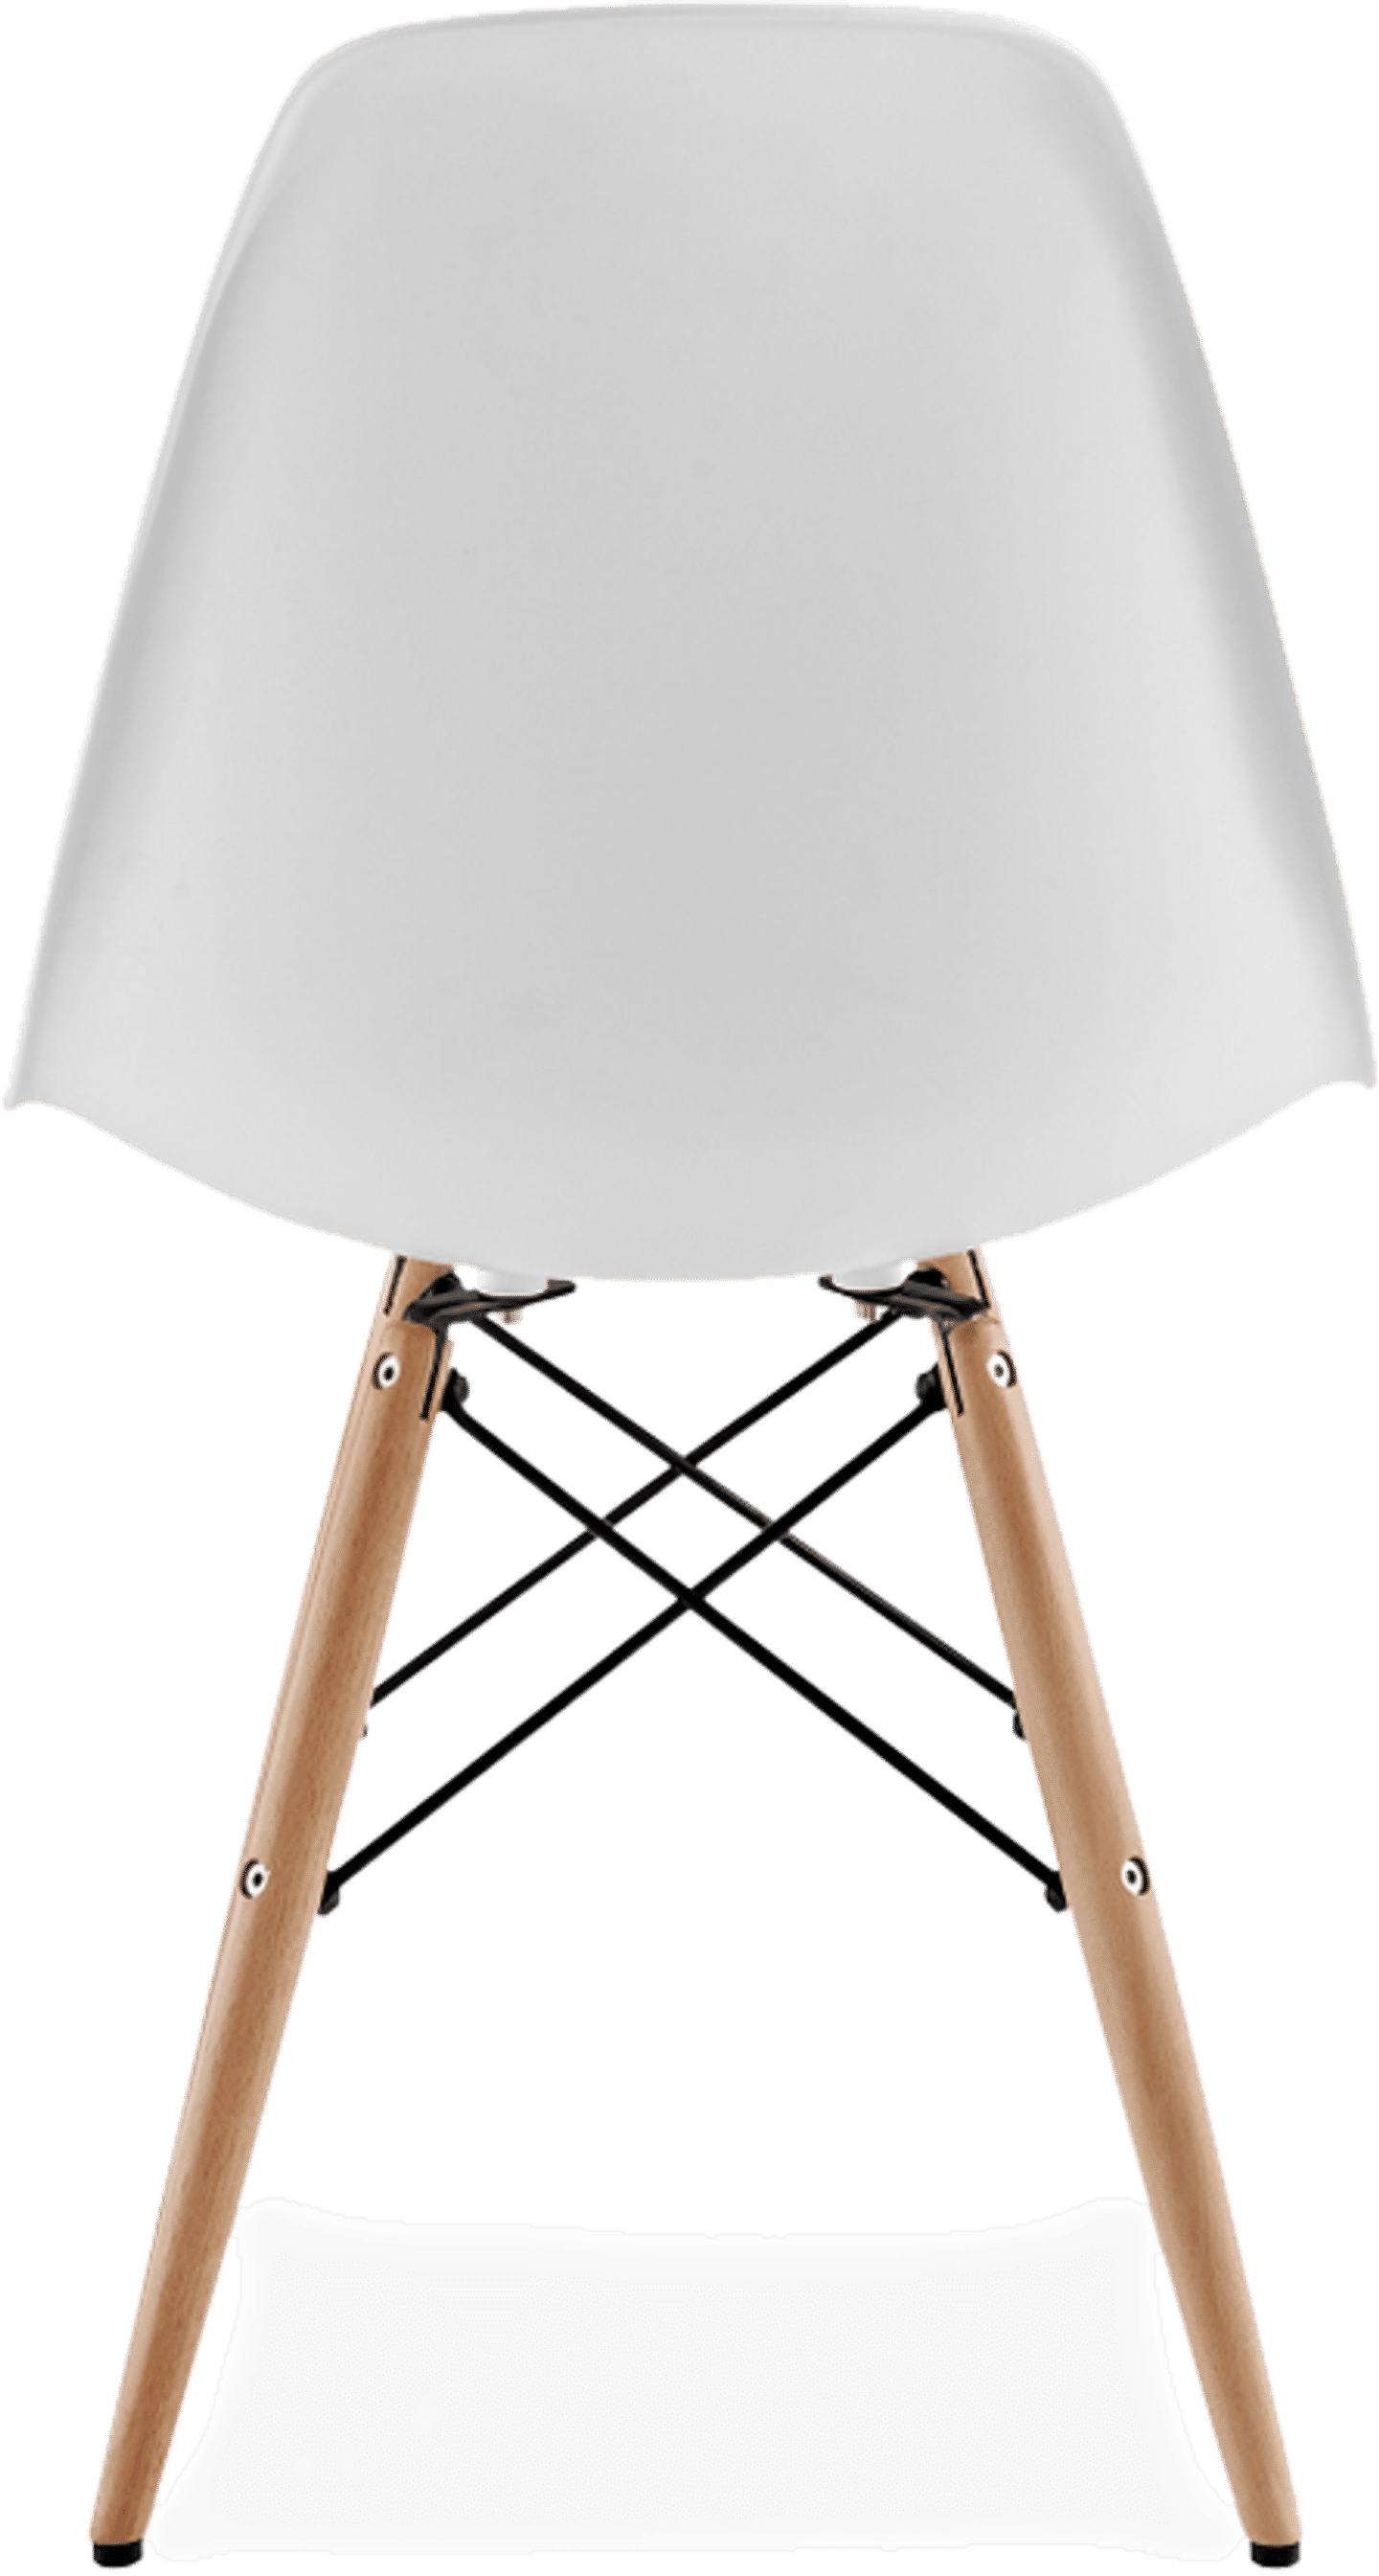 DSW Style Chair White/Light Wood image.